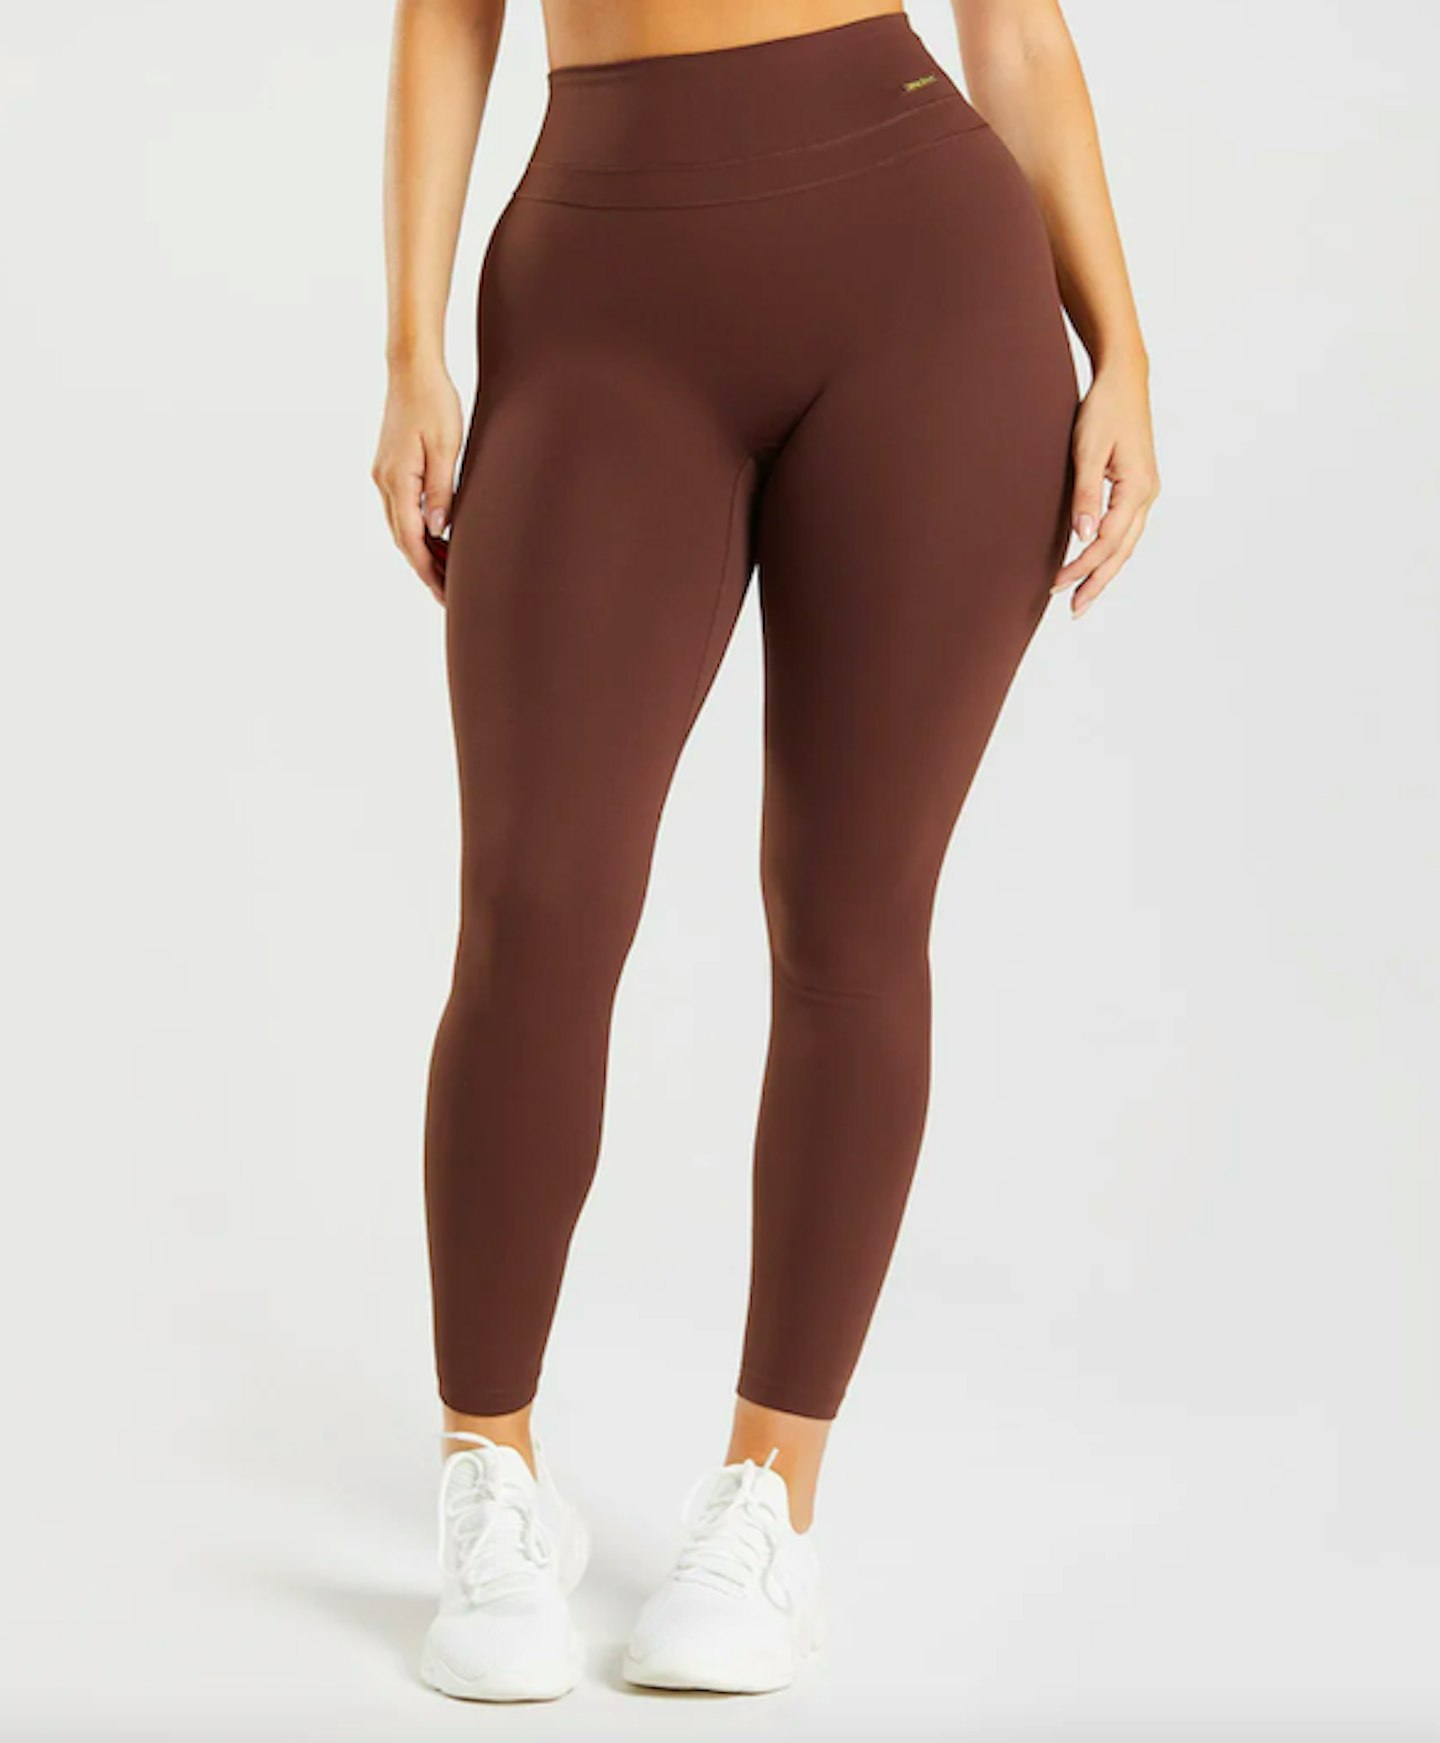 Gymshark Whitney Simmons Leggings. First collection. Perfect